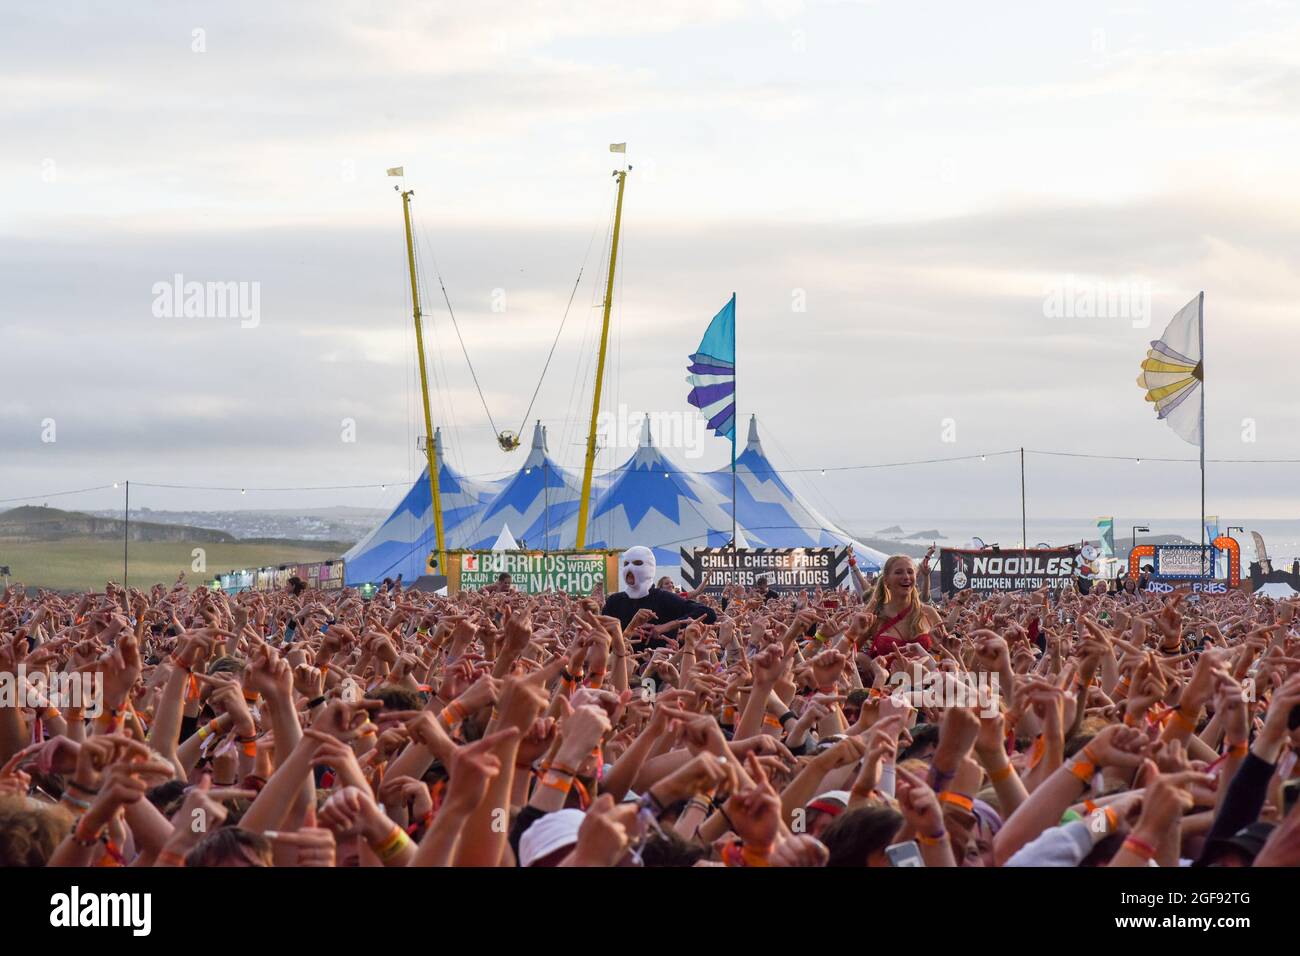 Boardmasters 2021 the surf and music festival was held 13th-15th August 2021, 40000+ people attended Boardmasters 2021 above Watergate Bay, Cornwall, UK. Stock Photo